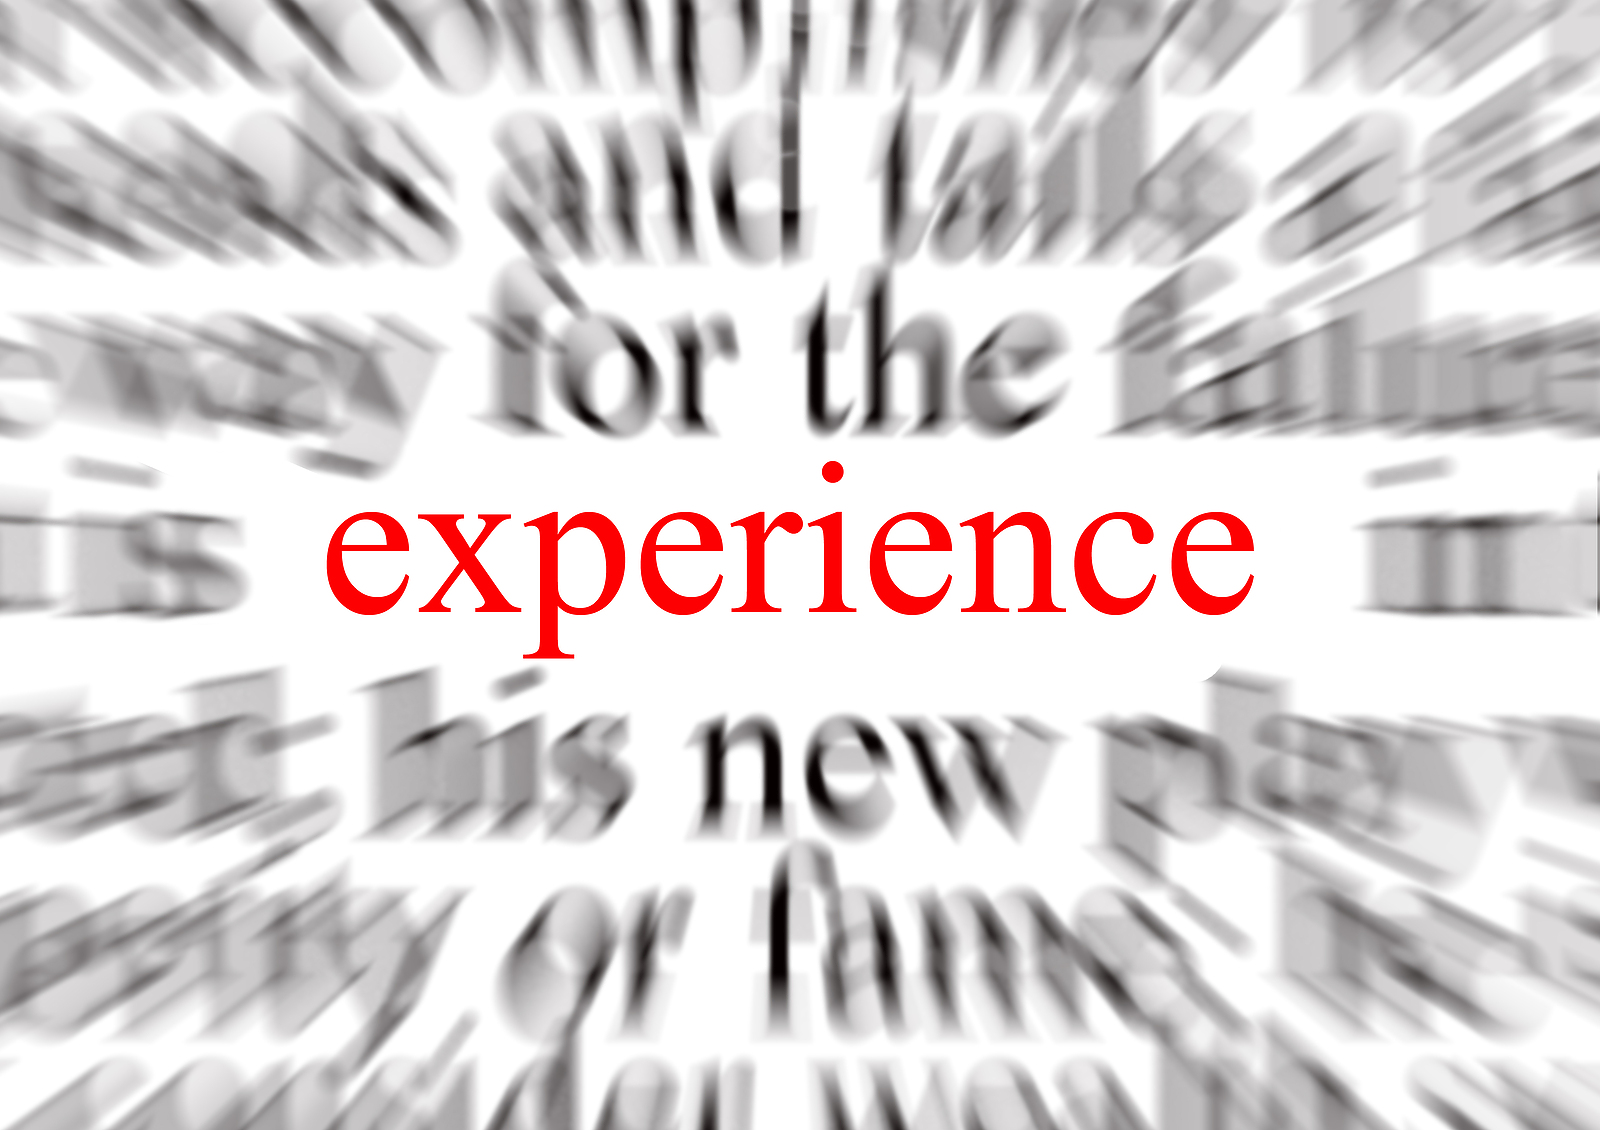 What is Experiential Marketing What is Experiential Marketing?